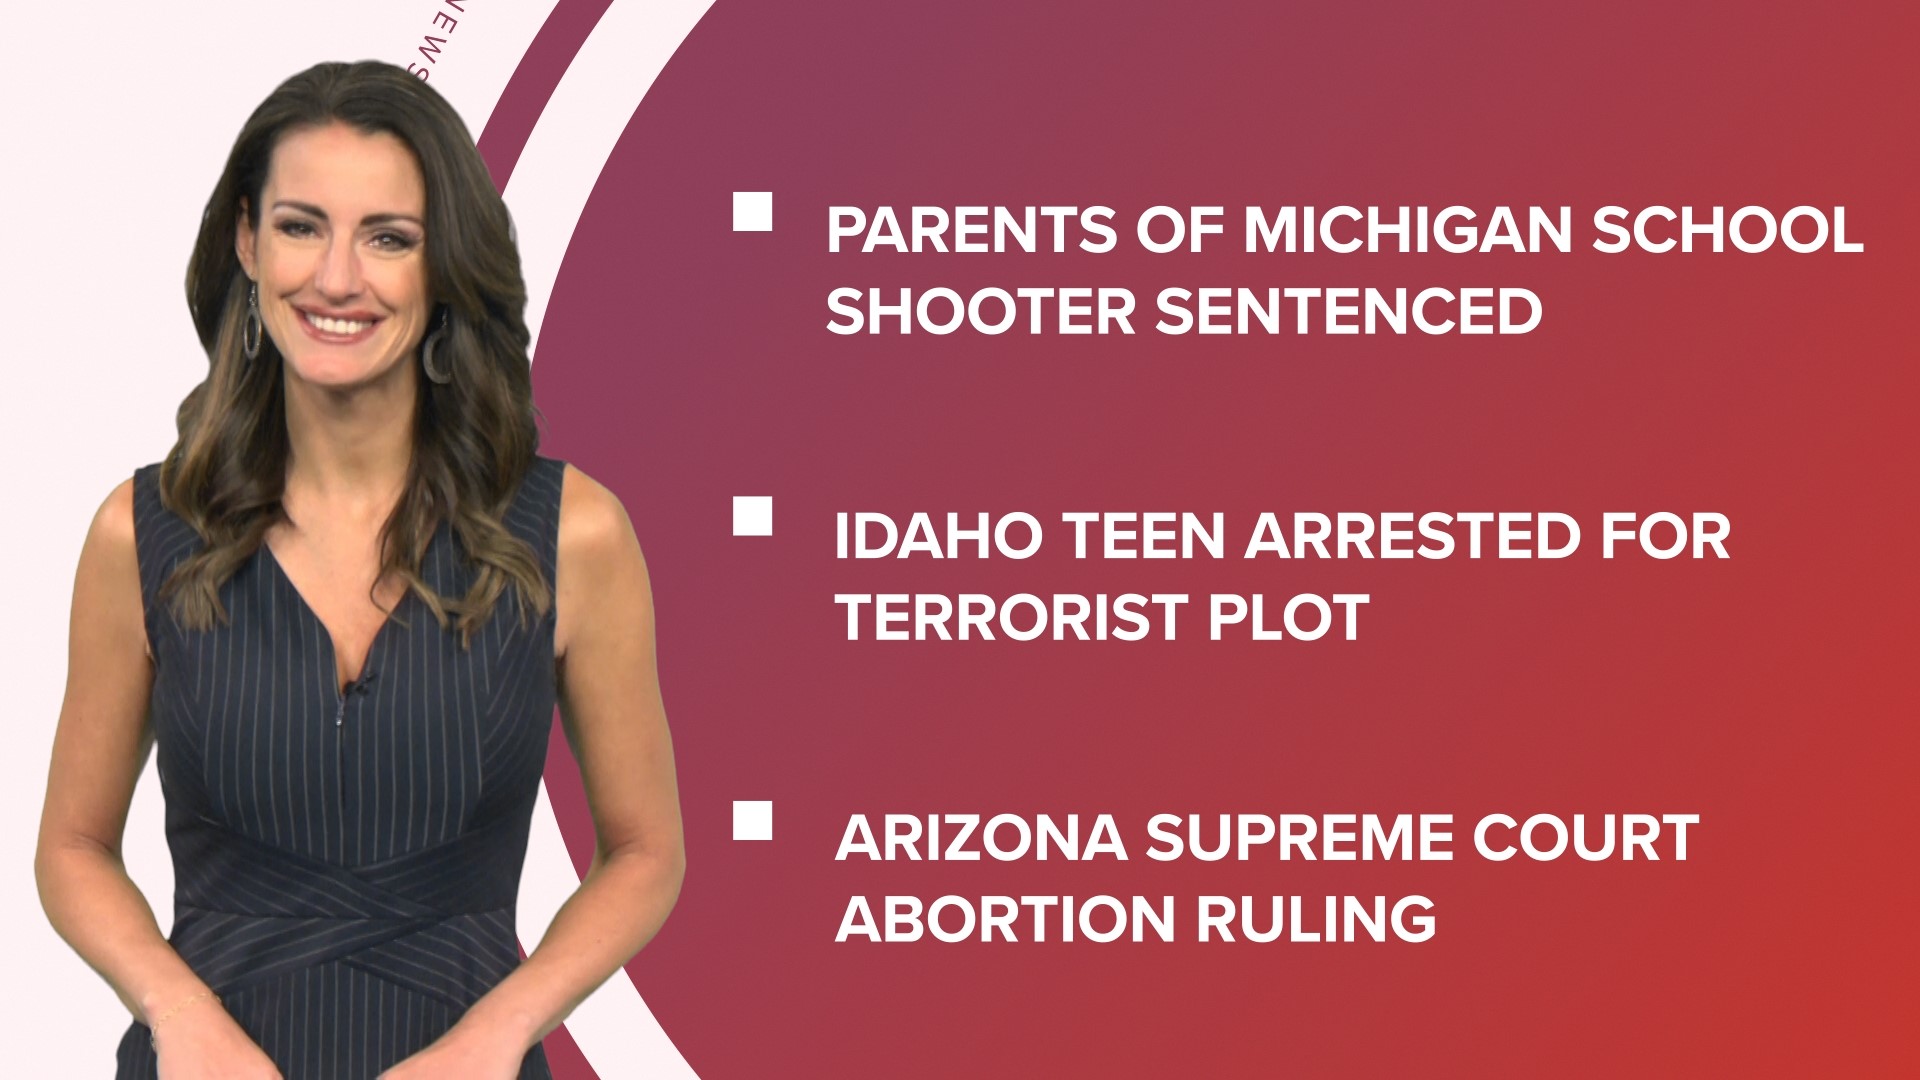 A look at what is happening in the news from parents of the Oxford school shooter sentenced to Arizona's Supreme Court clears way for near-total abortion ban.